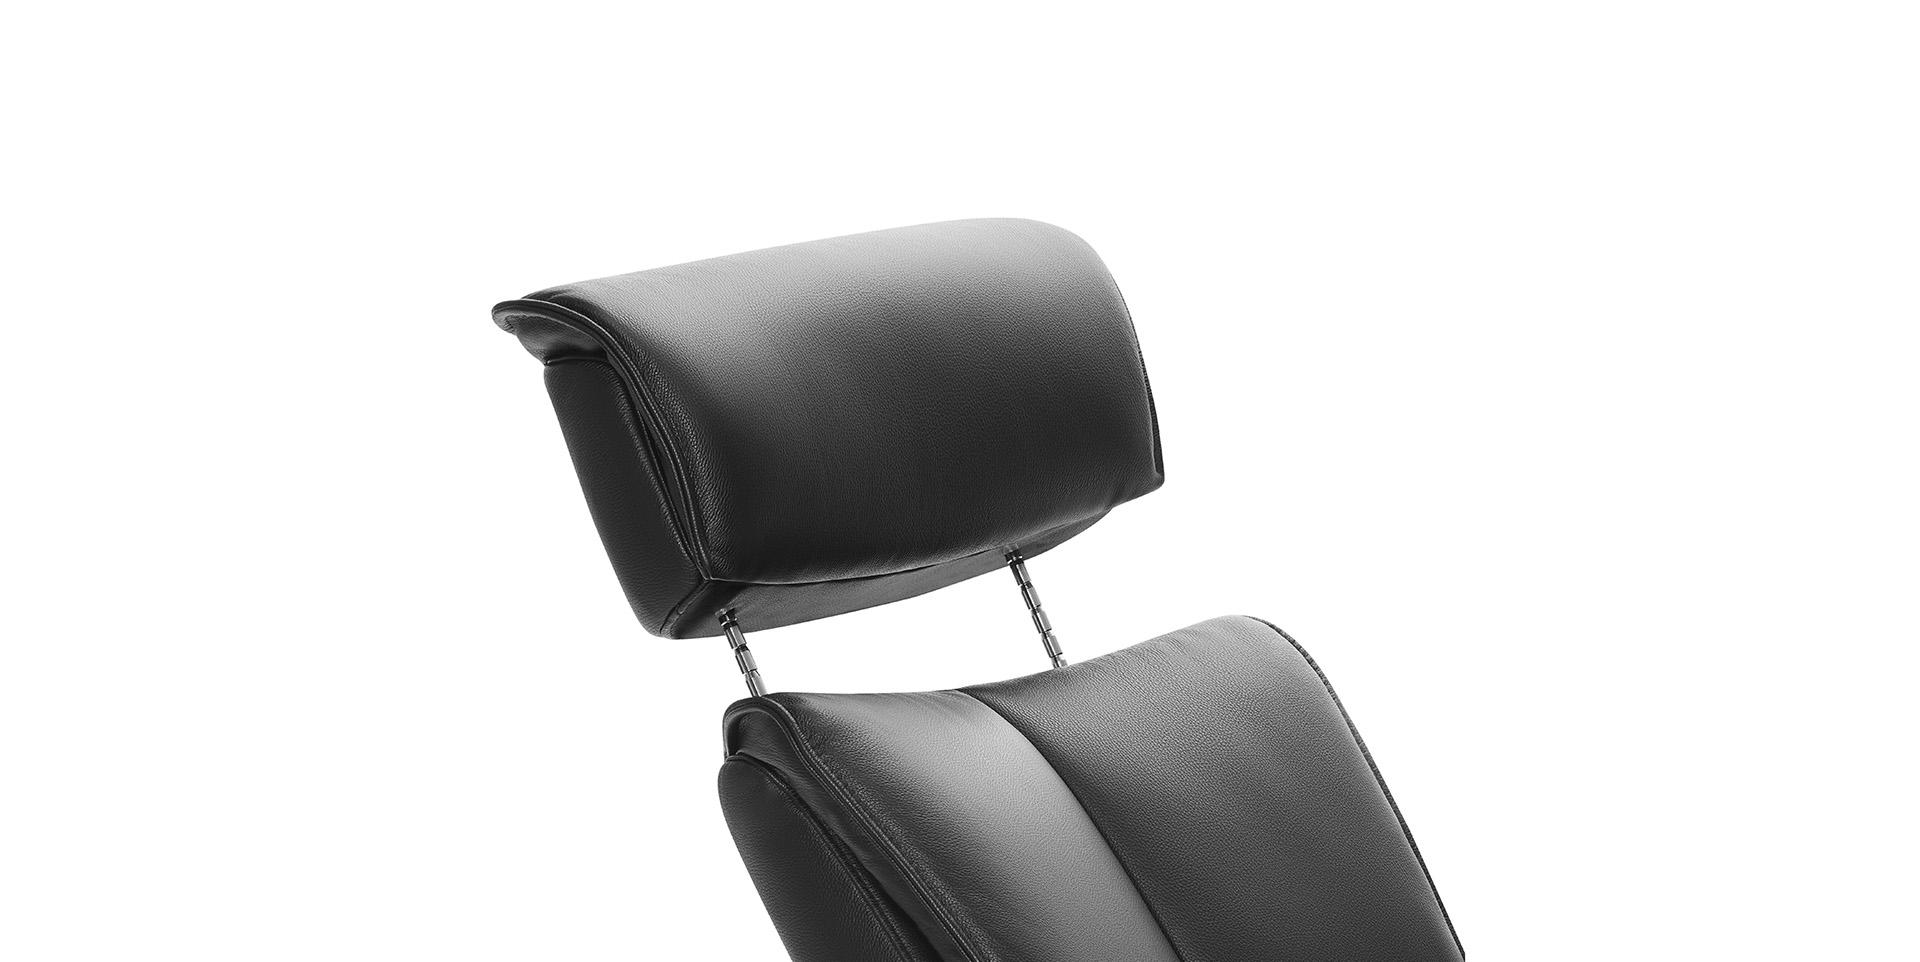 Slider Fauteuil relaxation SOLVEIG 5500 (image 3)